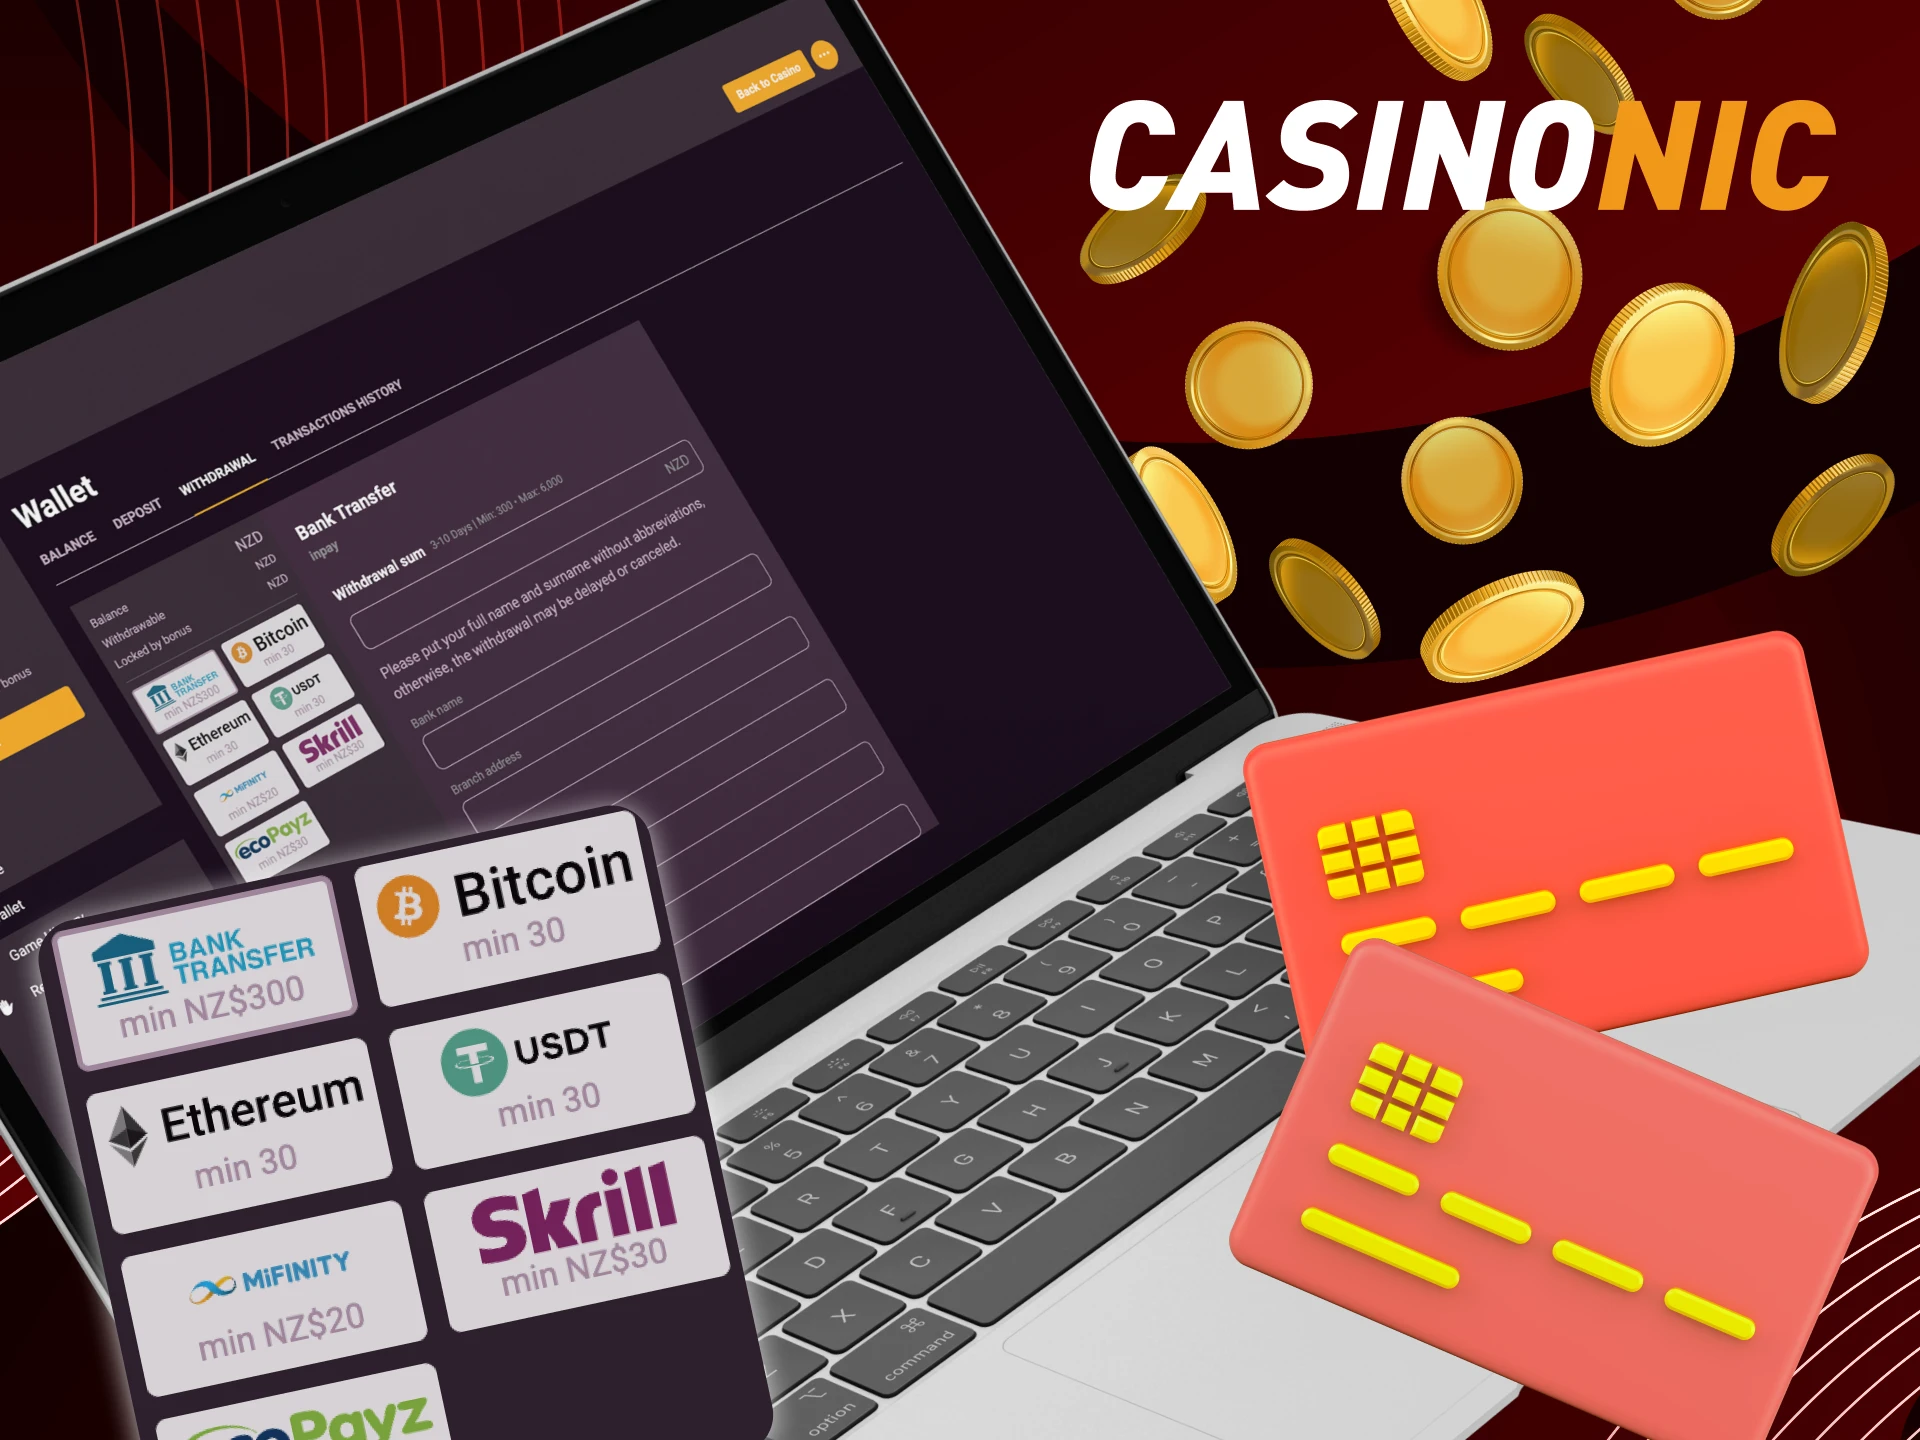 How do you withdraw money from your account at CasinoNic online casino.